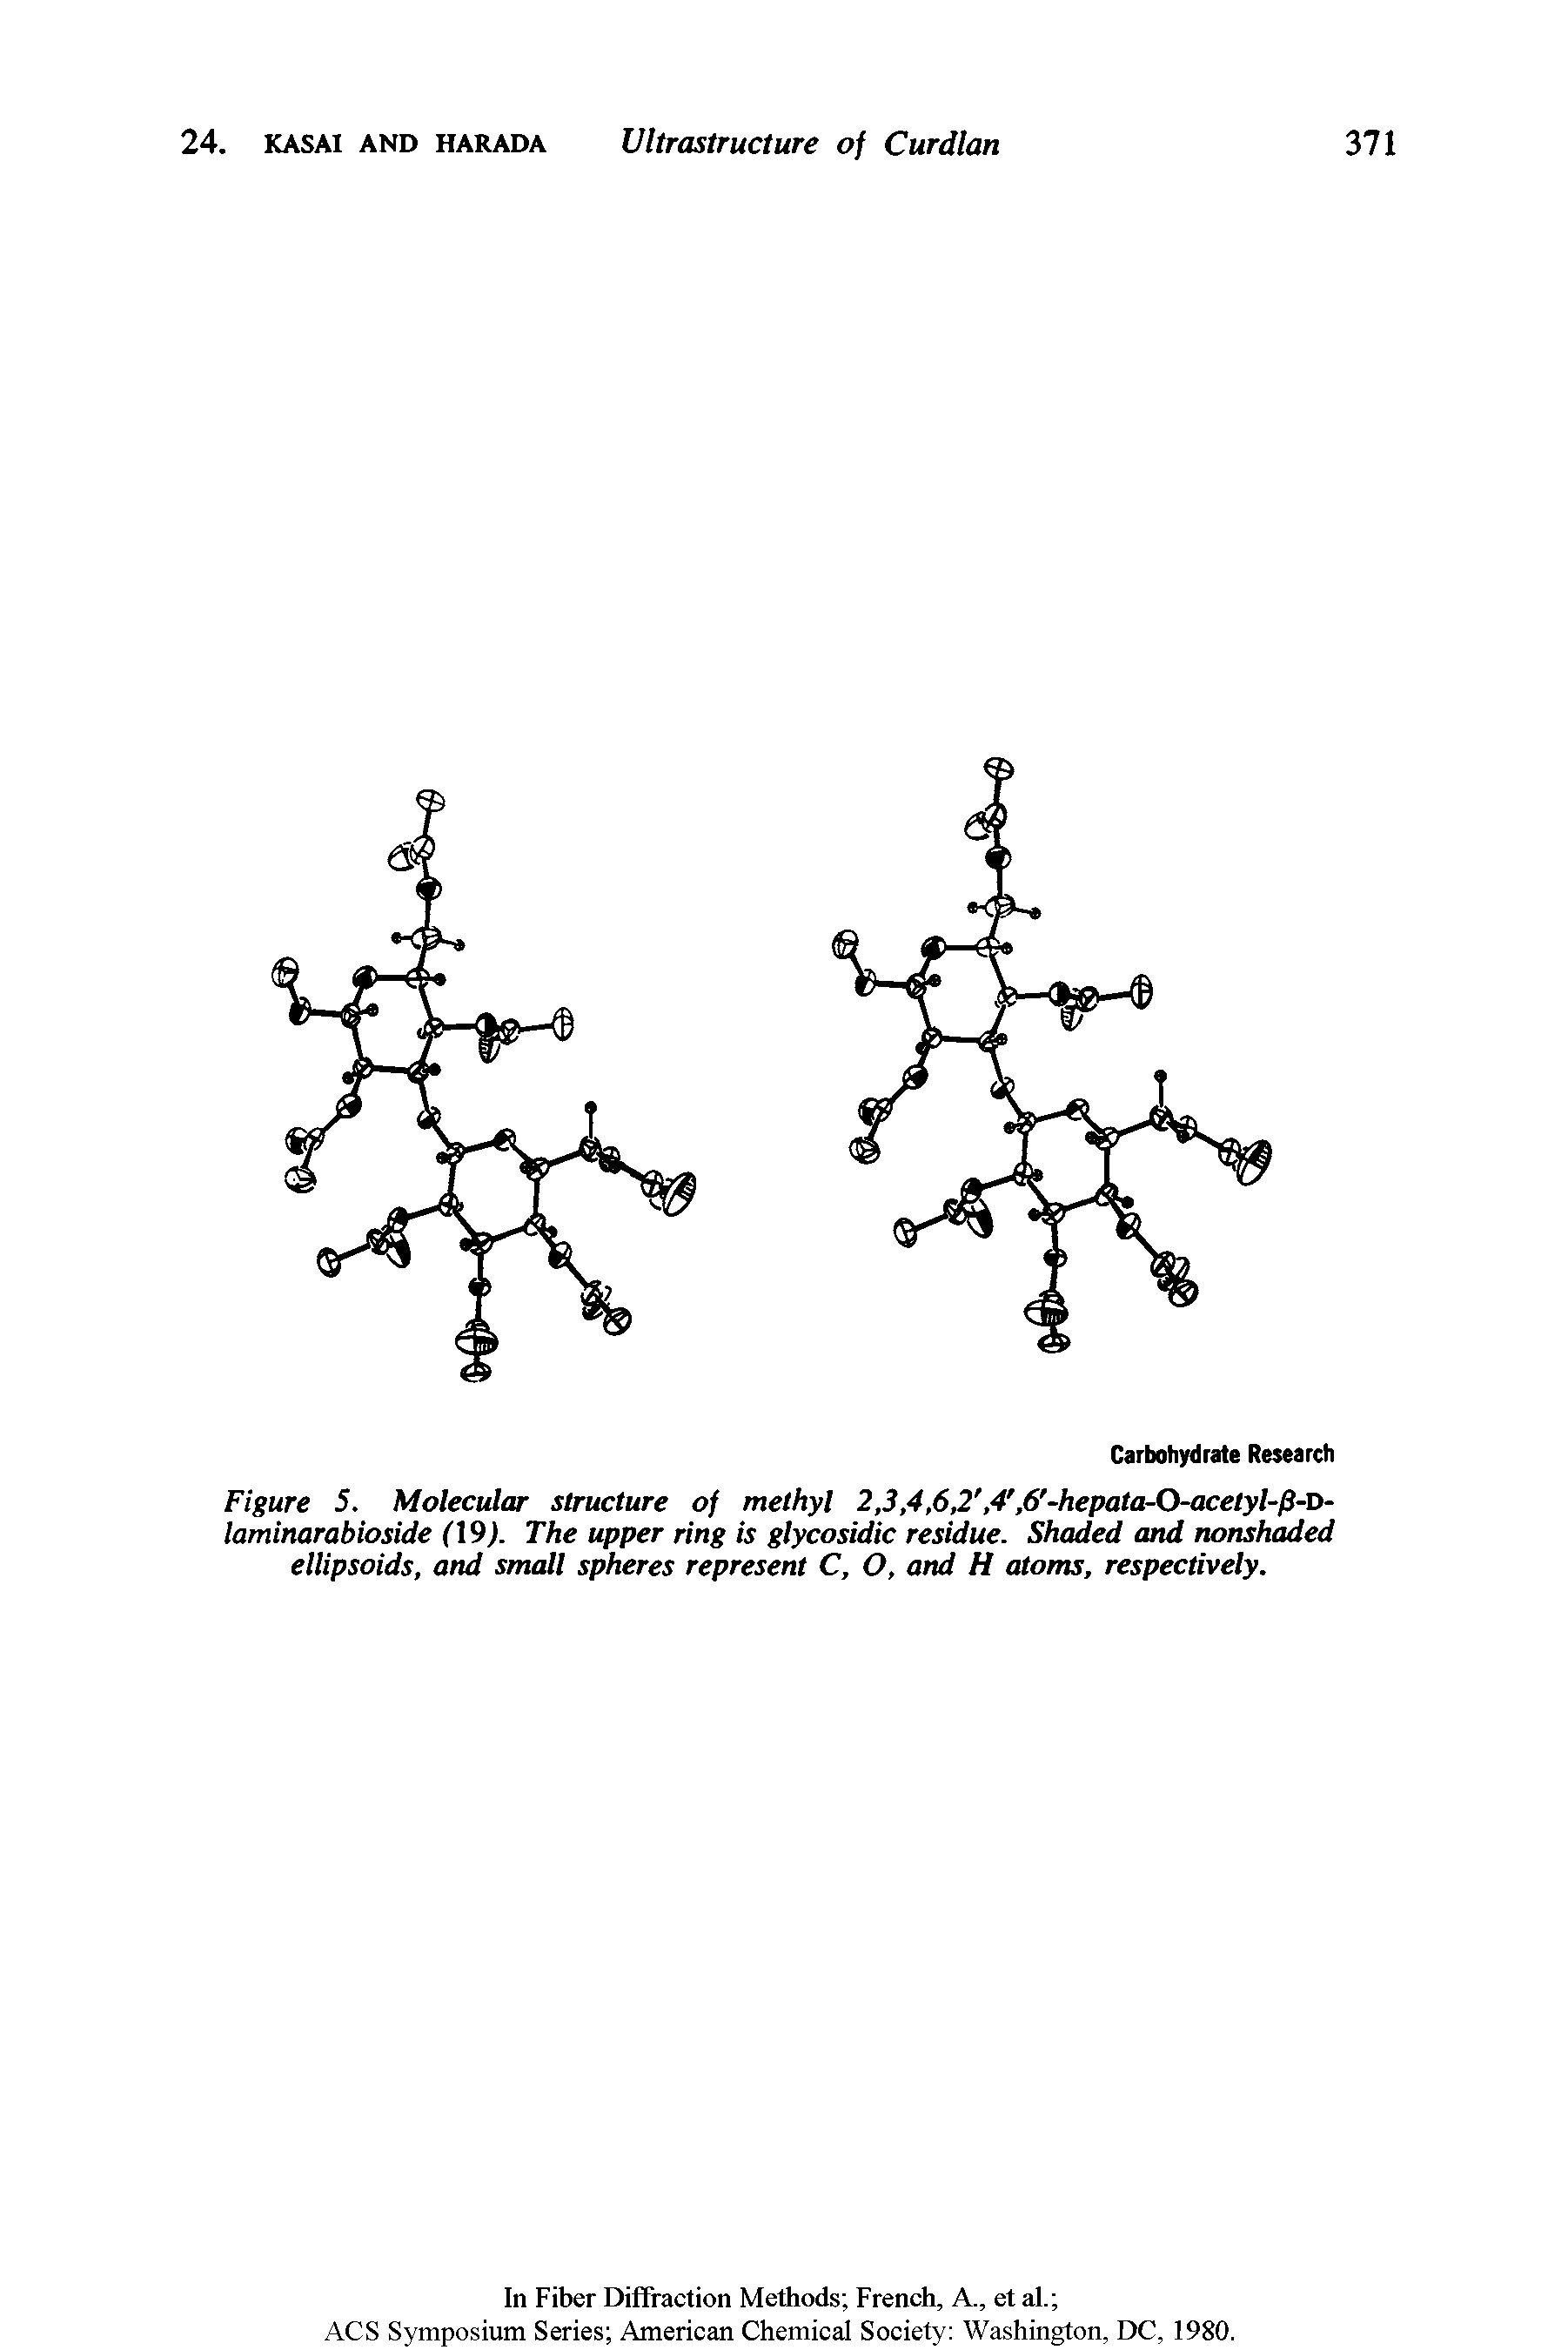 Figure 5. Molecular structure of methyl 2,3,4,6,2, 4, 6 -hepata-0-acetyl-fS-l>-laminarabioside (19). The upper ring is glycosidic residue. Shaded and nonshaded ellipsoids, and small spheres represent C, O, and H atoms, respectively.